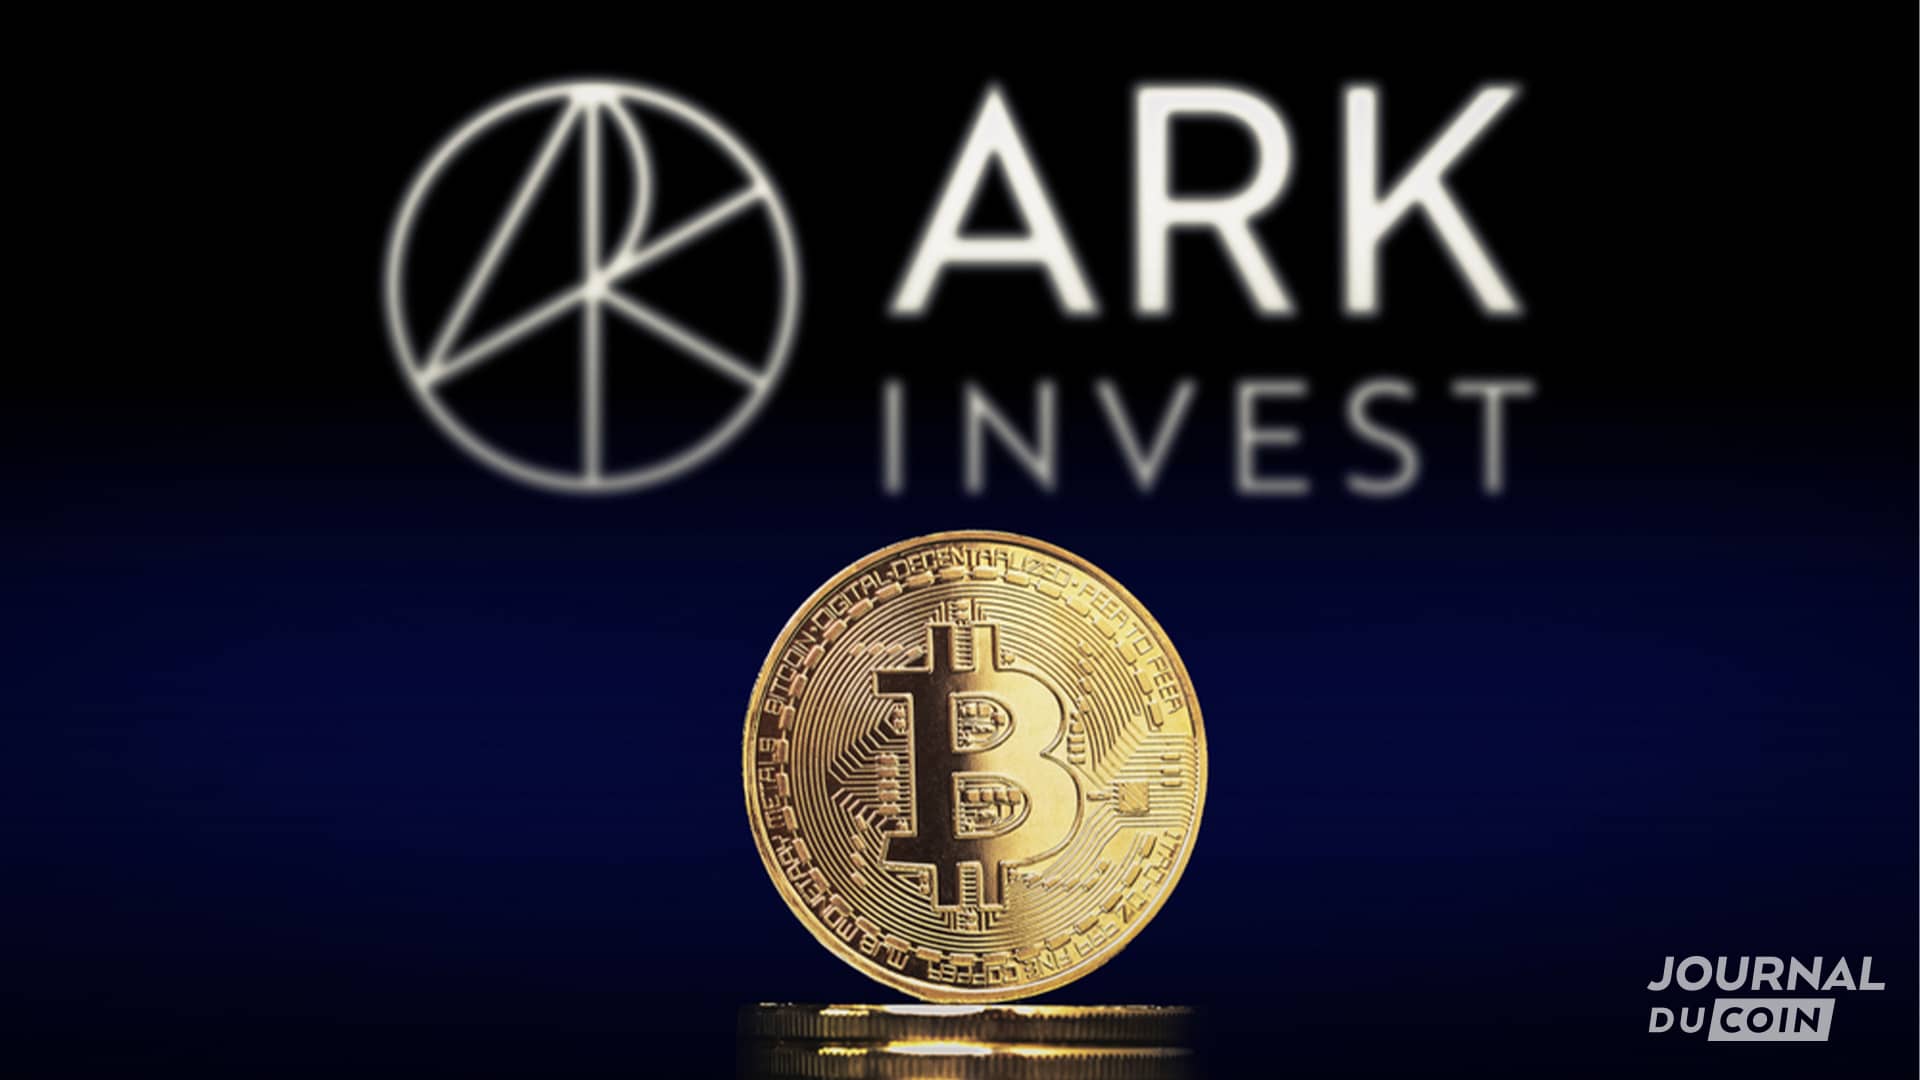 Cathie Wood (CEO of Ark Invest) sells Coinbase (COIN) shares for $50 million.